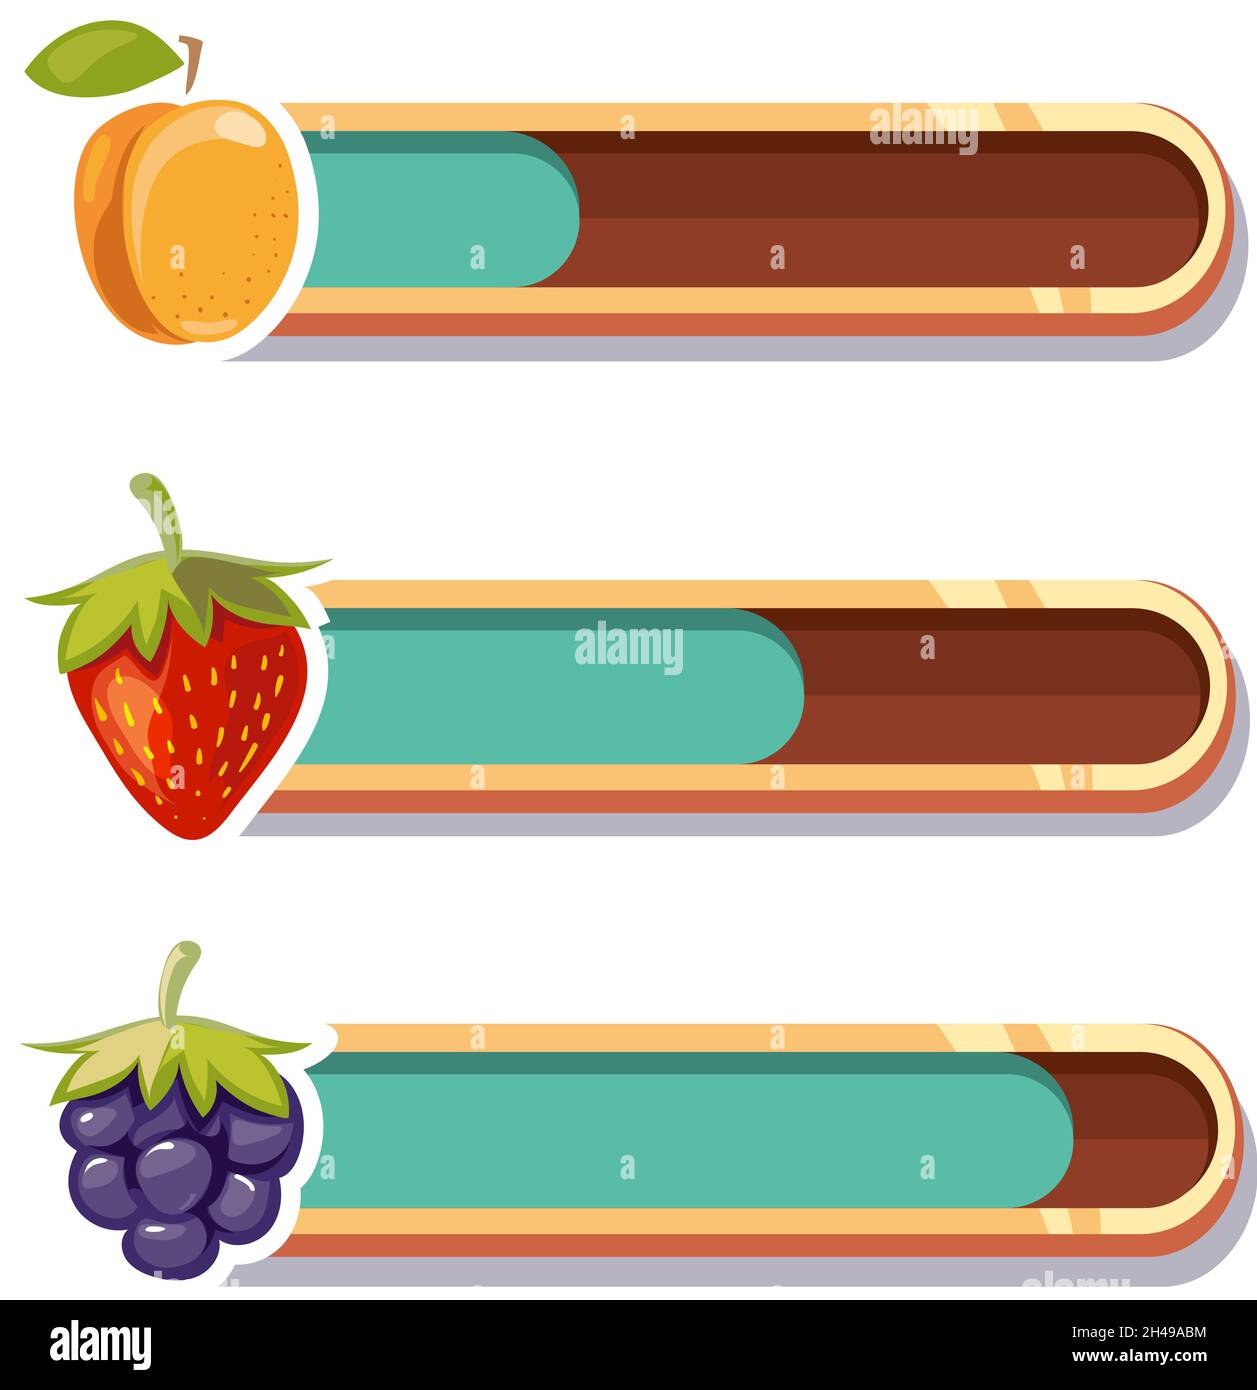 Game interface bars. Cartoon gaming loading panel with fruits. Isolated ...